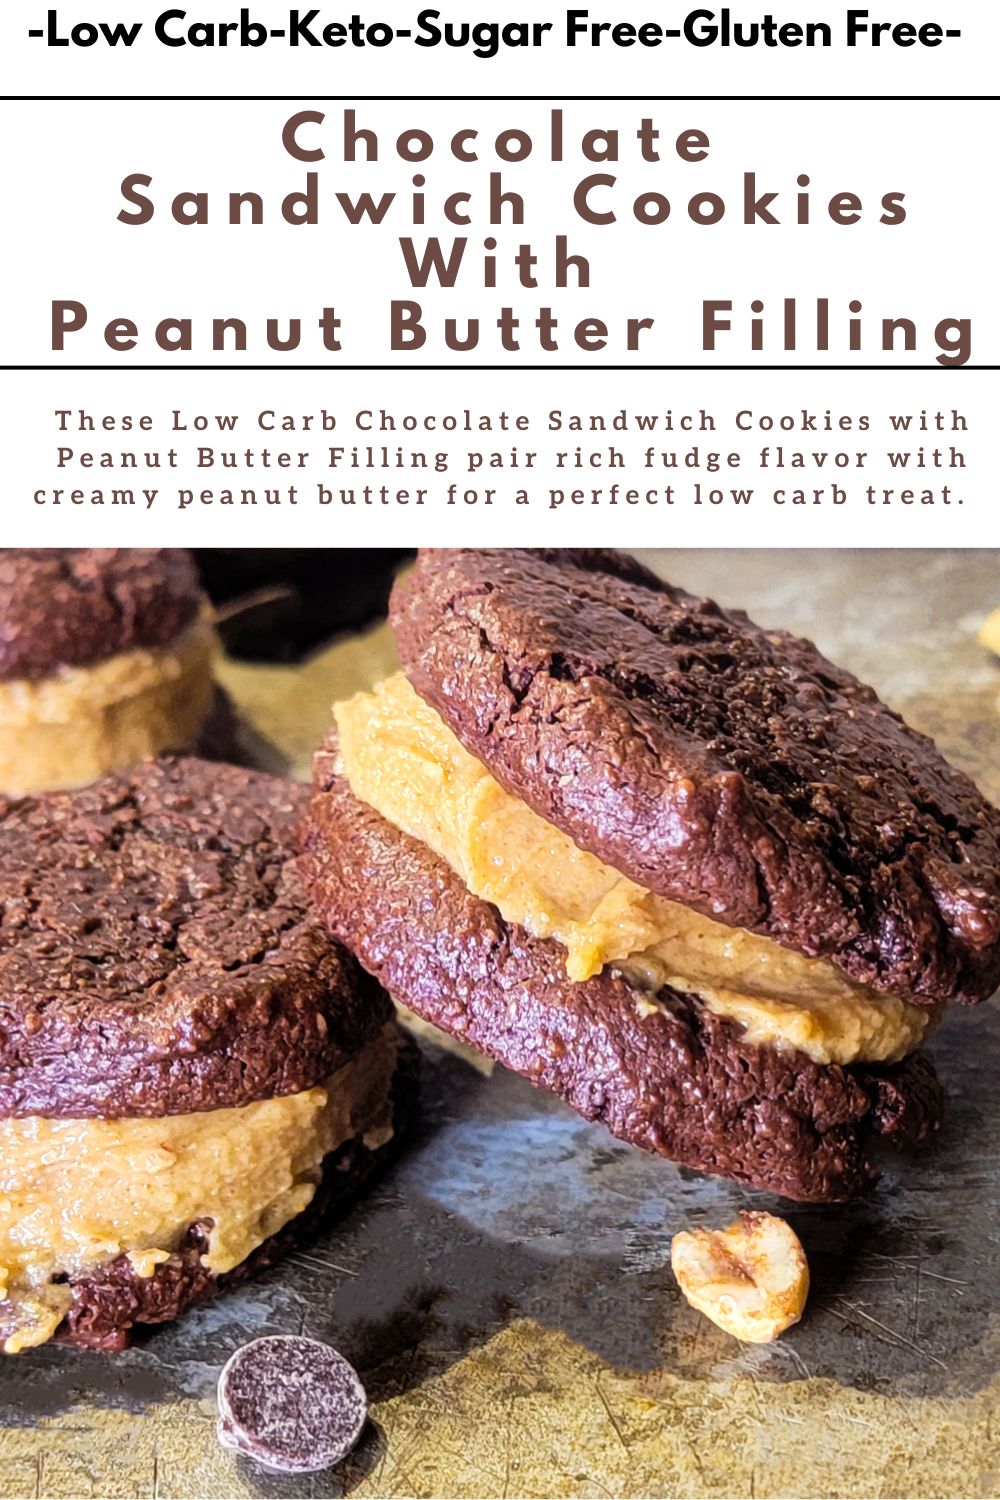 Low Carb Chocolate Sandwich Cookies with Peanut Butter Filling on plate